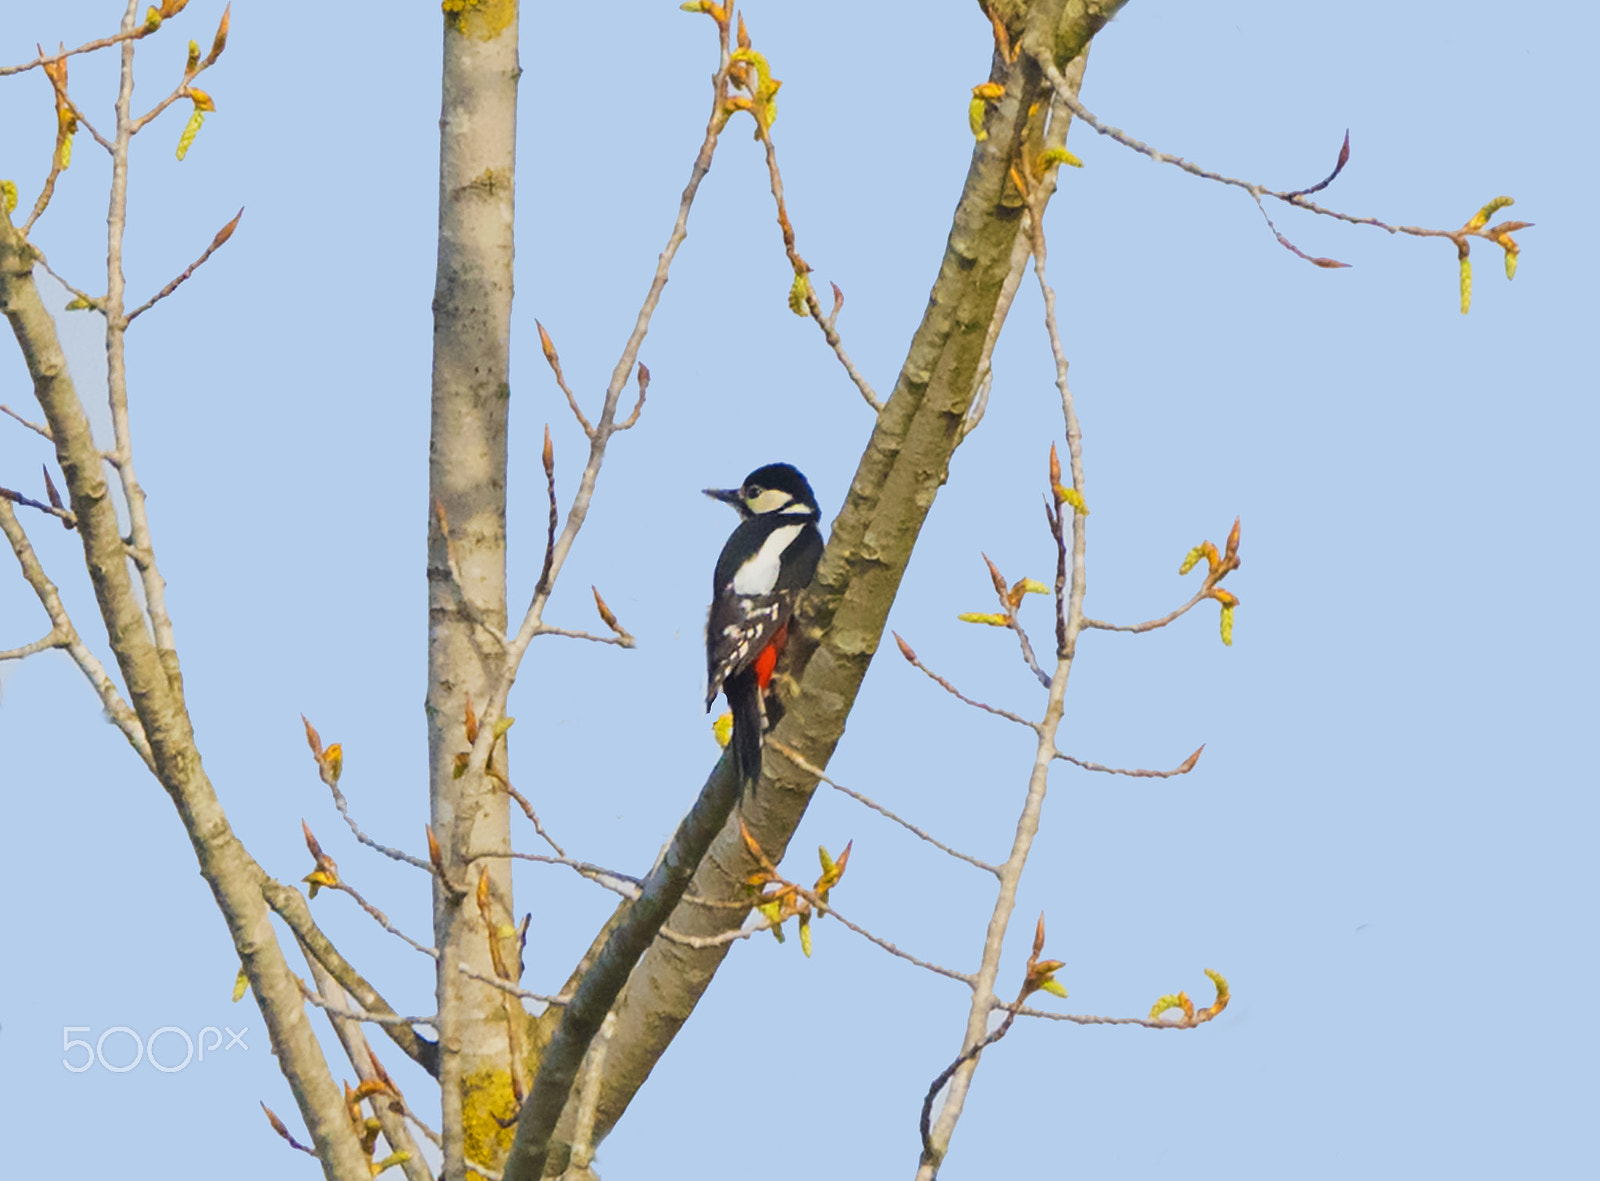 Nikon D810 + Sigma 150-600mm F5-6.3 DG OS HSM | C sample photo. Great spotted woodpecker photography